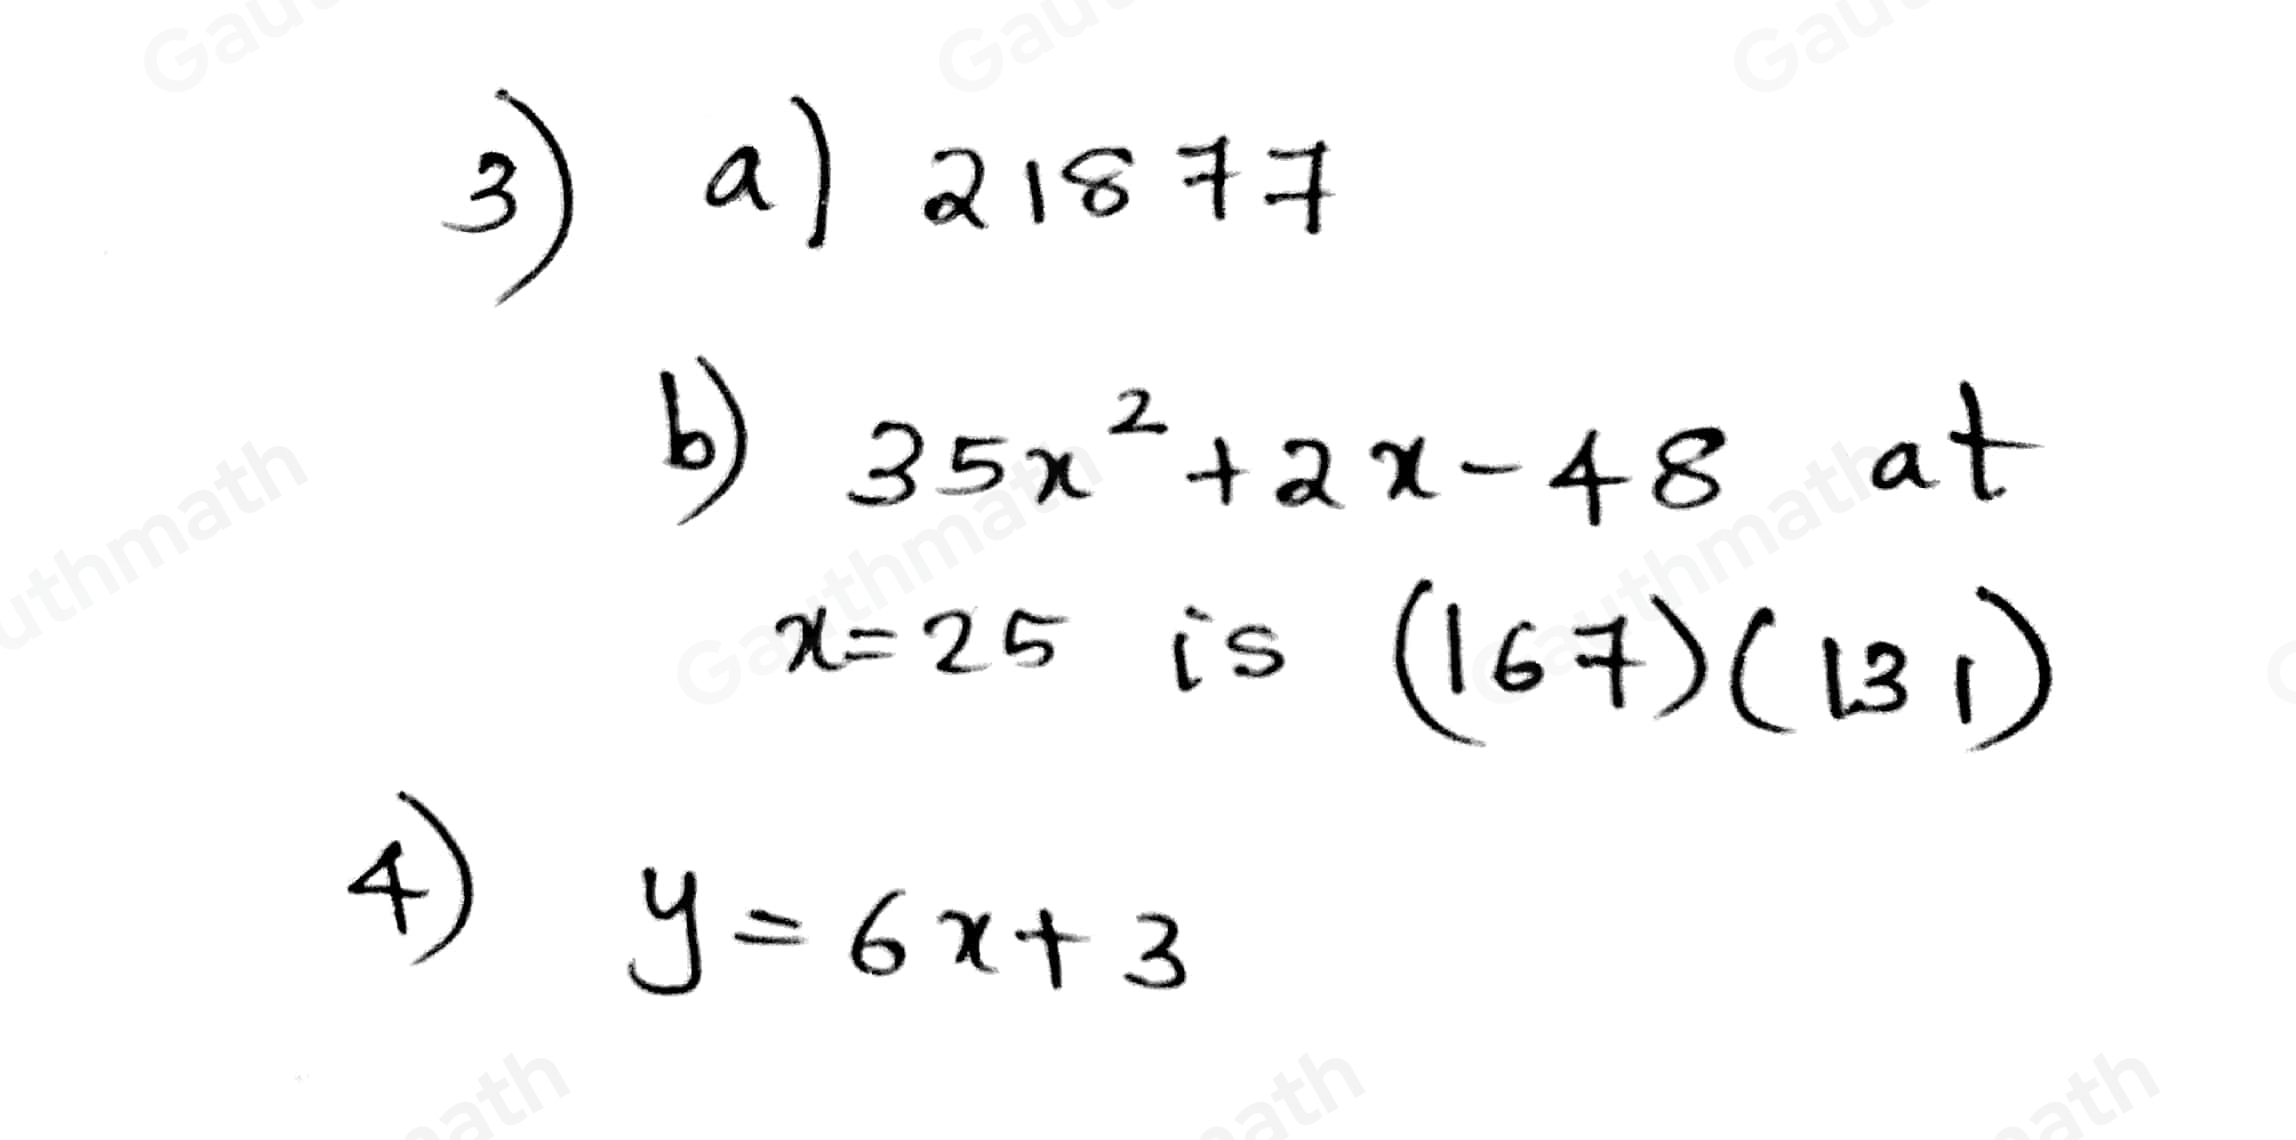 3, aFind the value of 35x2+2x-48 when x=25 [21 877] bBy factorizing the expression, show that your answer to part a can be written as the product of two prime factors. [5x+67x-8] 4. Express 272x+1 in the form 3y , stating y in terms of x [y=6x+3]